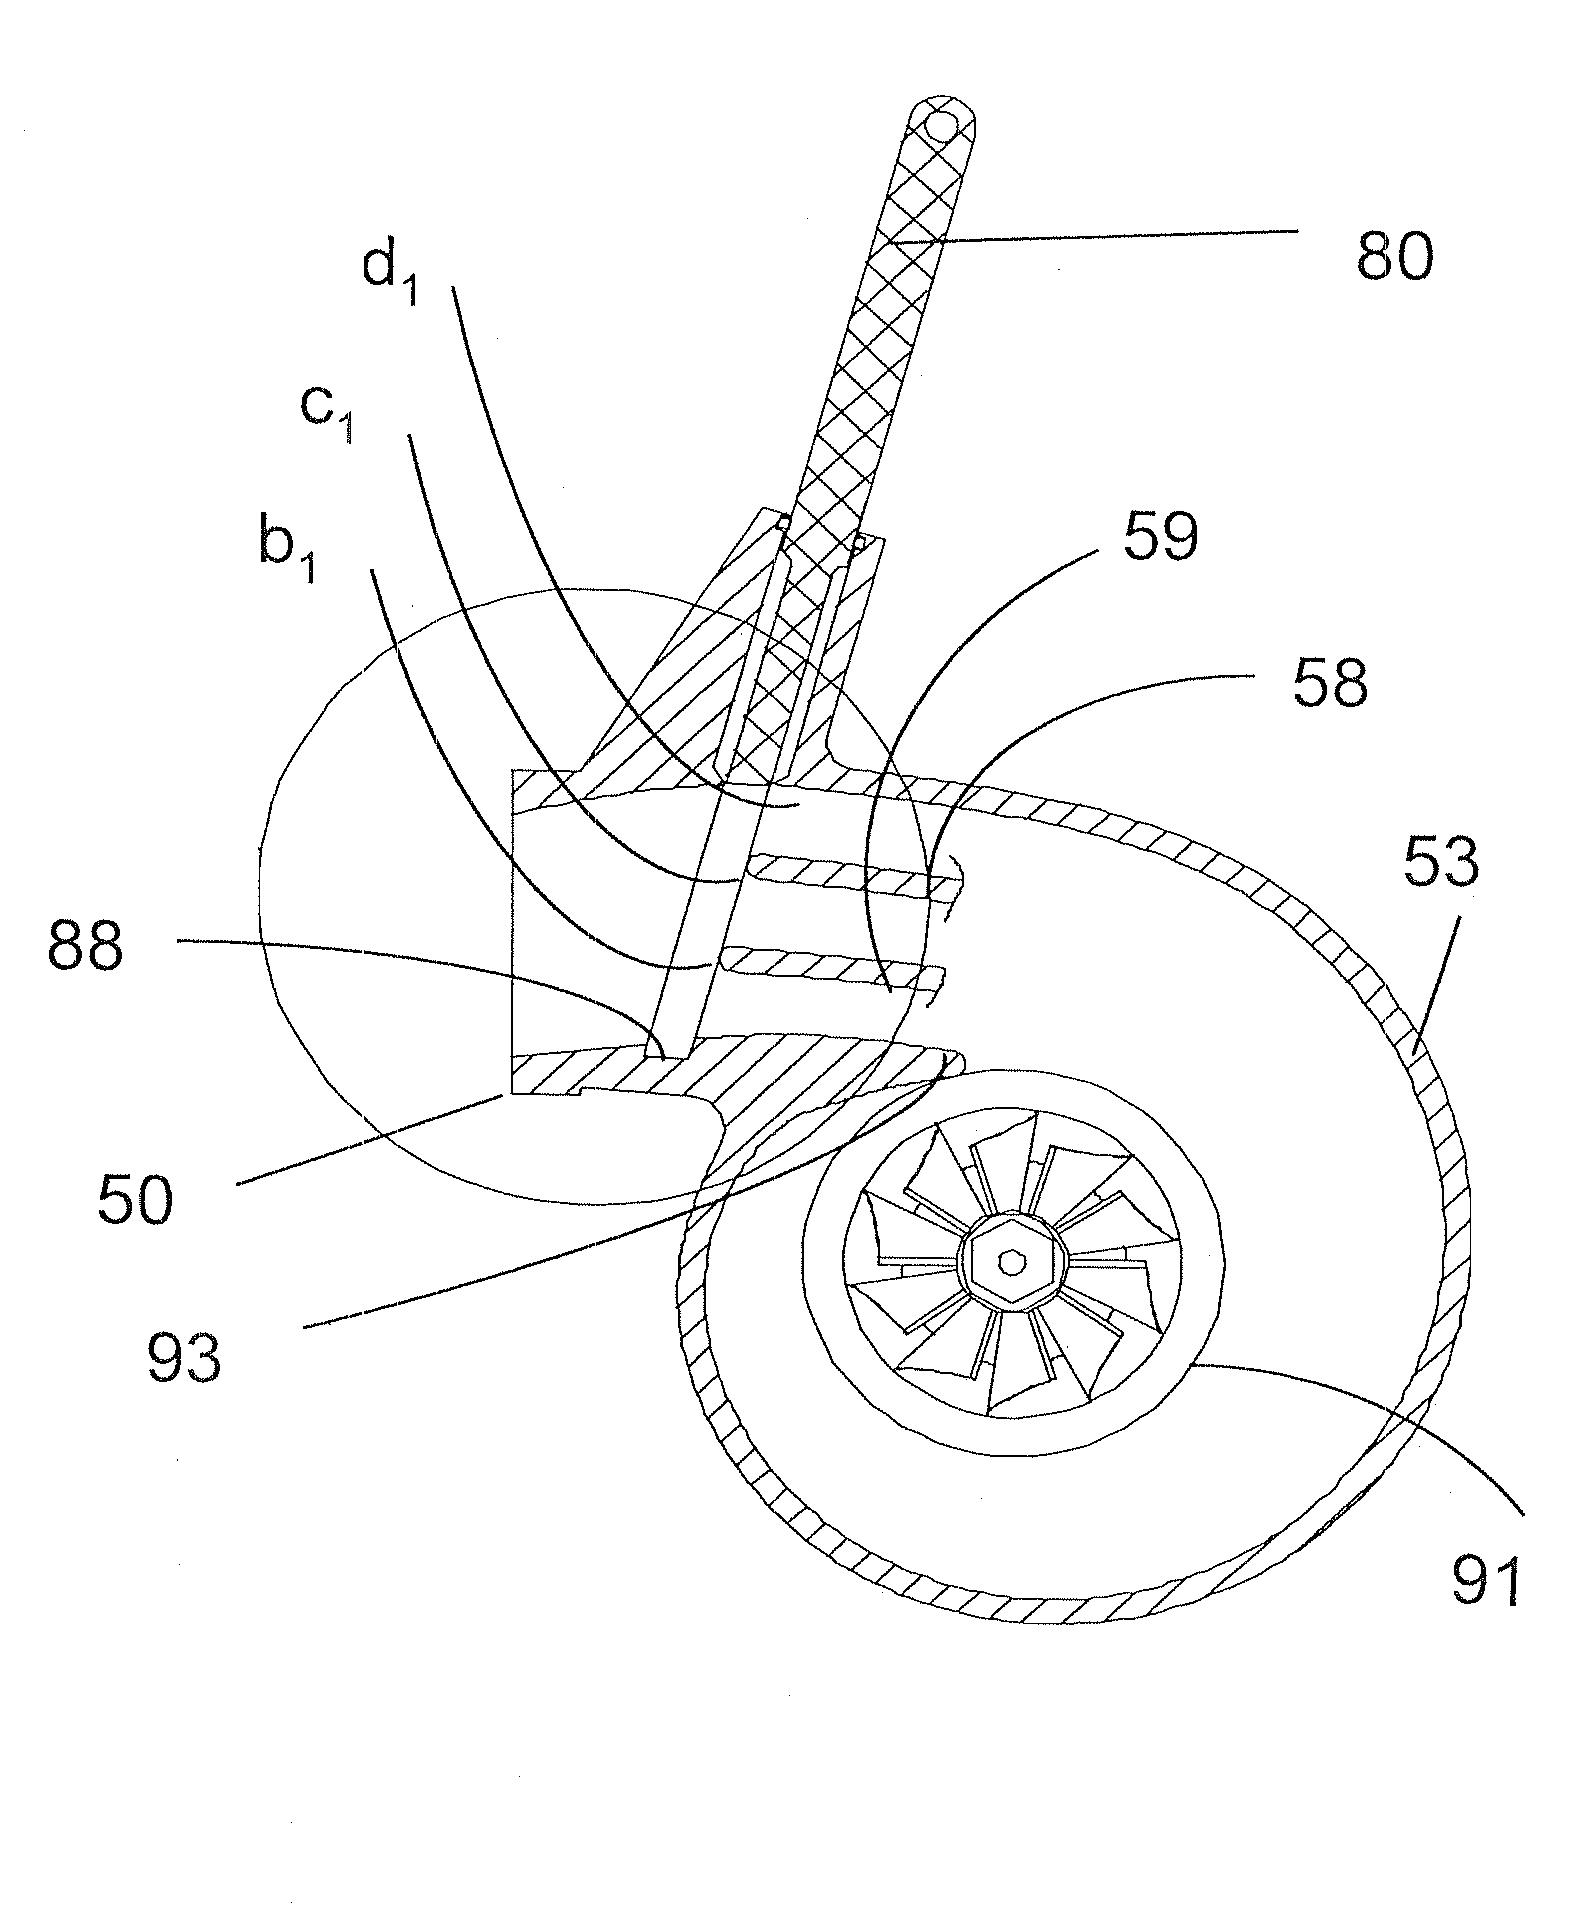 Simplified variable geometry turbocharger with sliding gate and multiple volutes